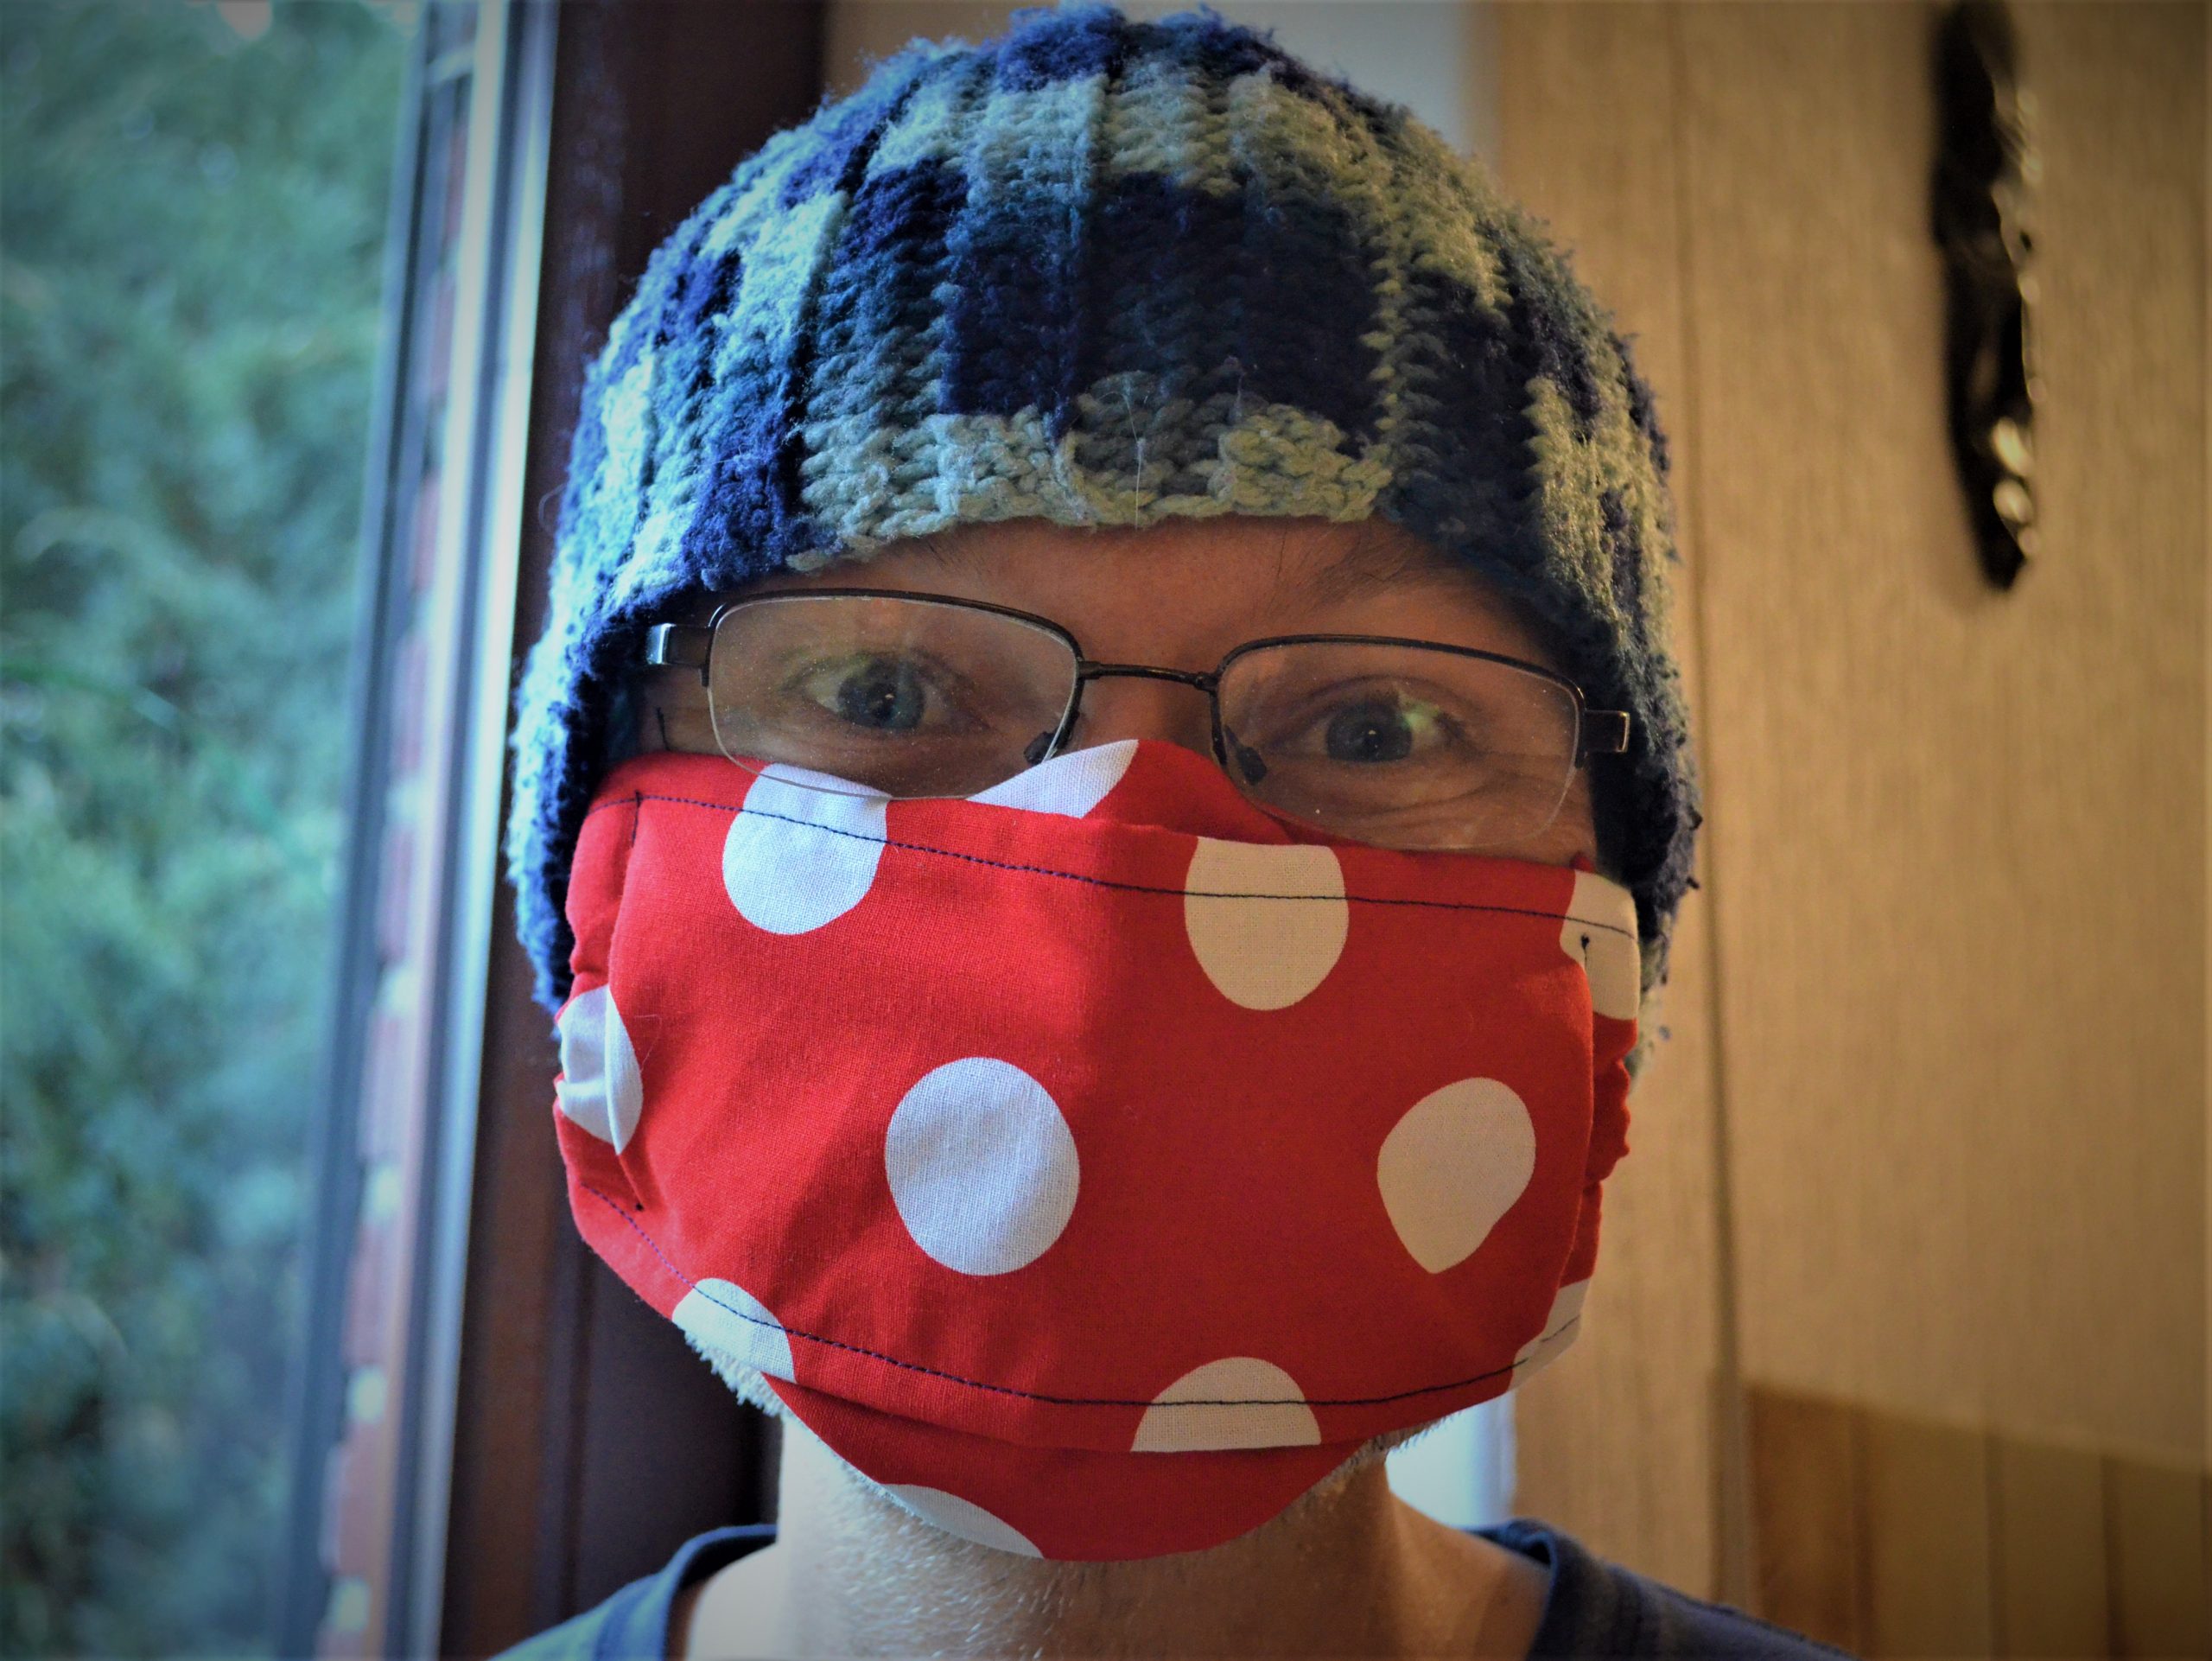 Person wearing large red face mask with white polka dots